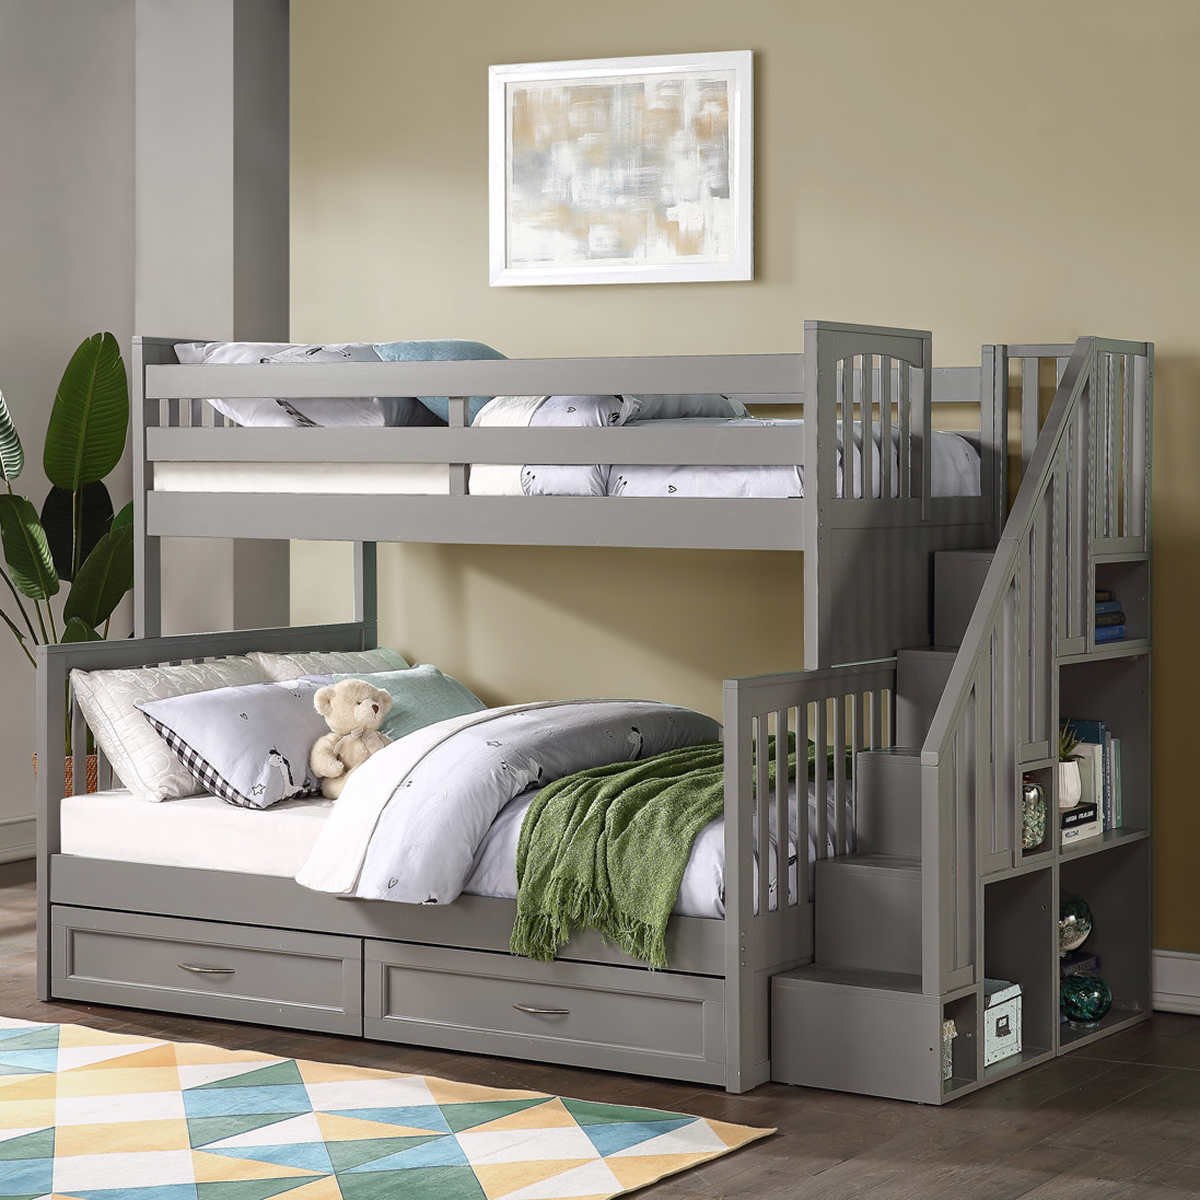 Bayside Twin Over Full Bunk Bed Costco 2022